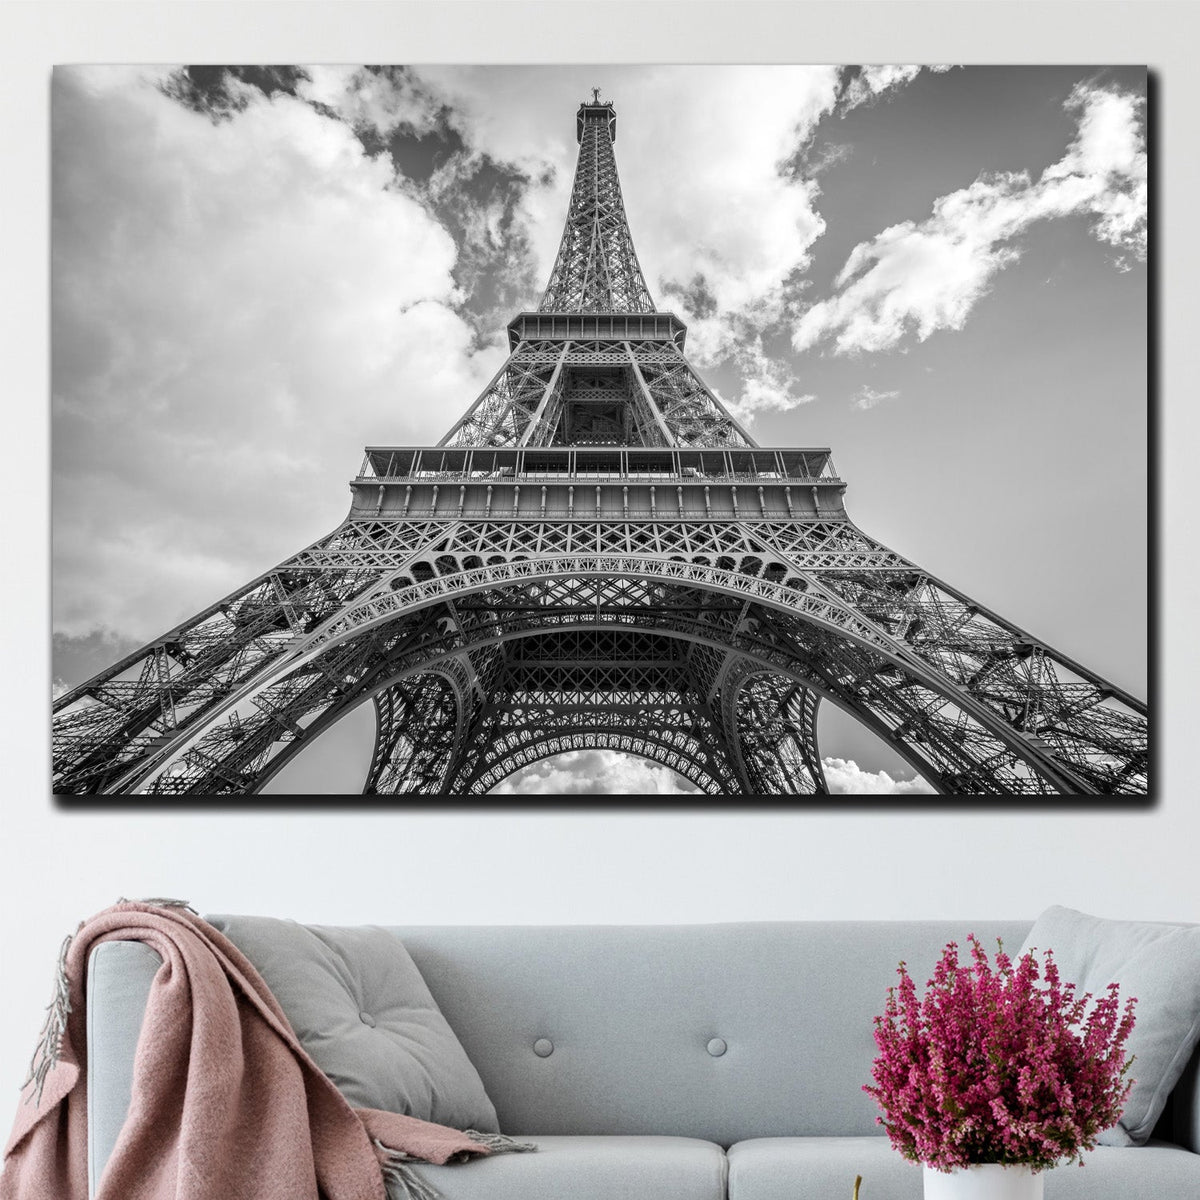 https://cdn.shopify.com/s/files/1/0387/9986/8044/products/TheIconicEiffelTowerCanvasArtprintStretched-1.jpg